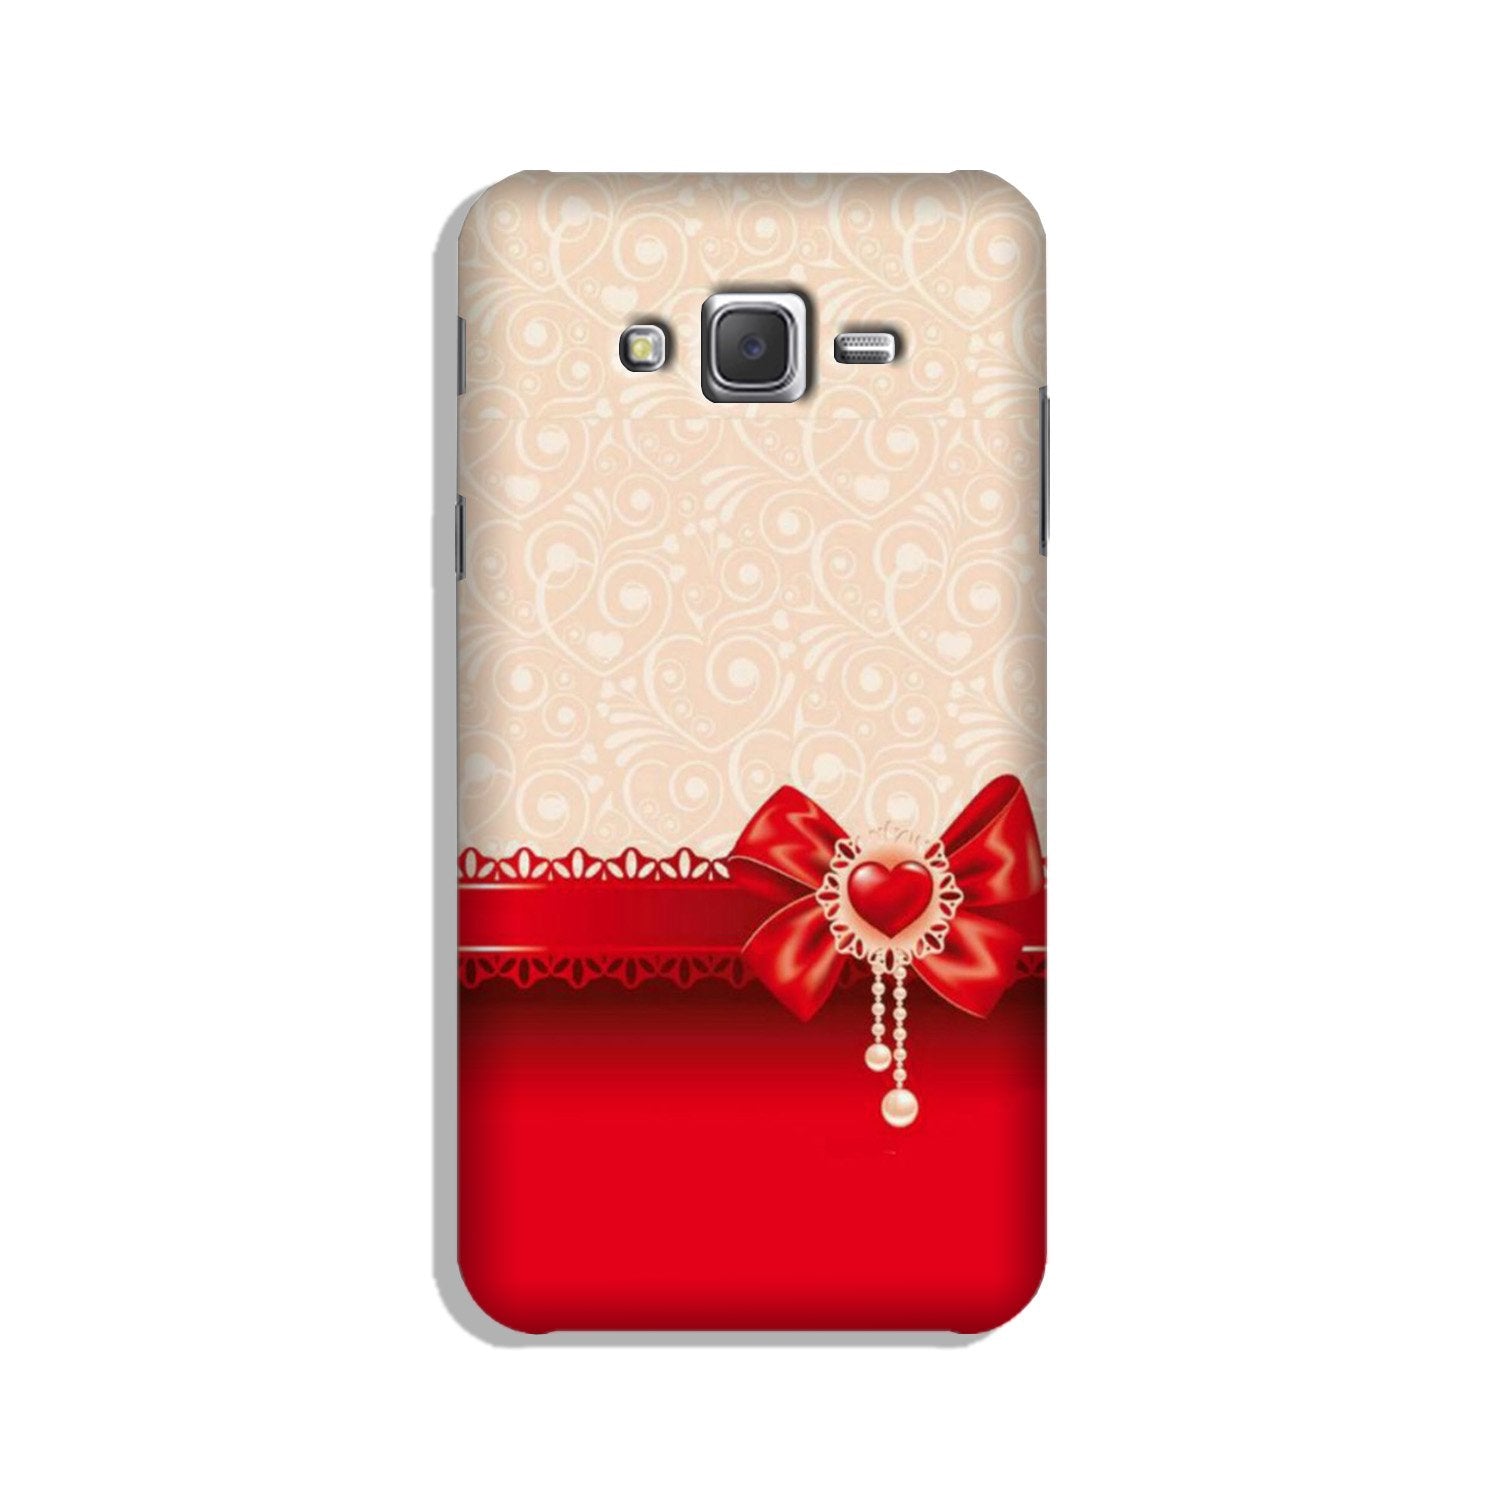 Gift Wrap3 Case for Galaxy J5 (2015)